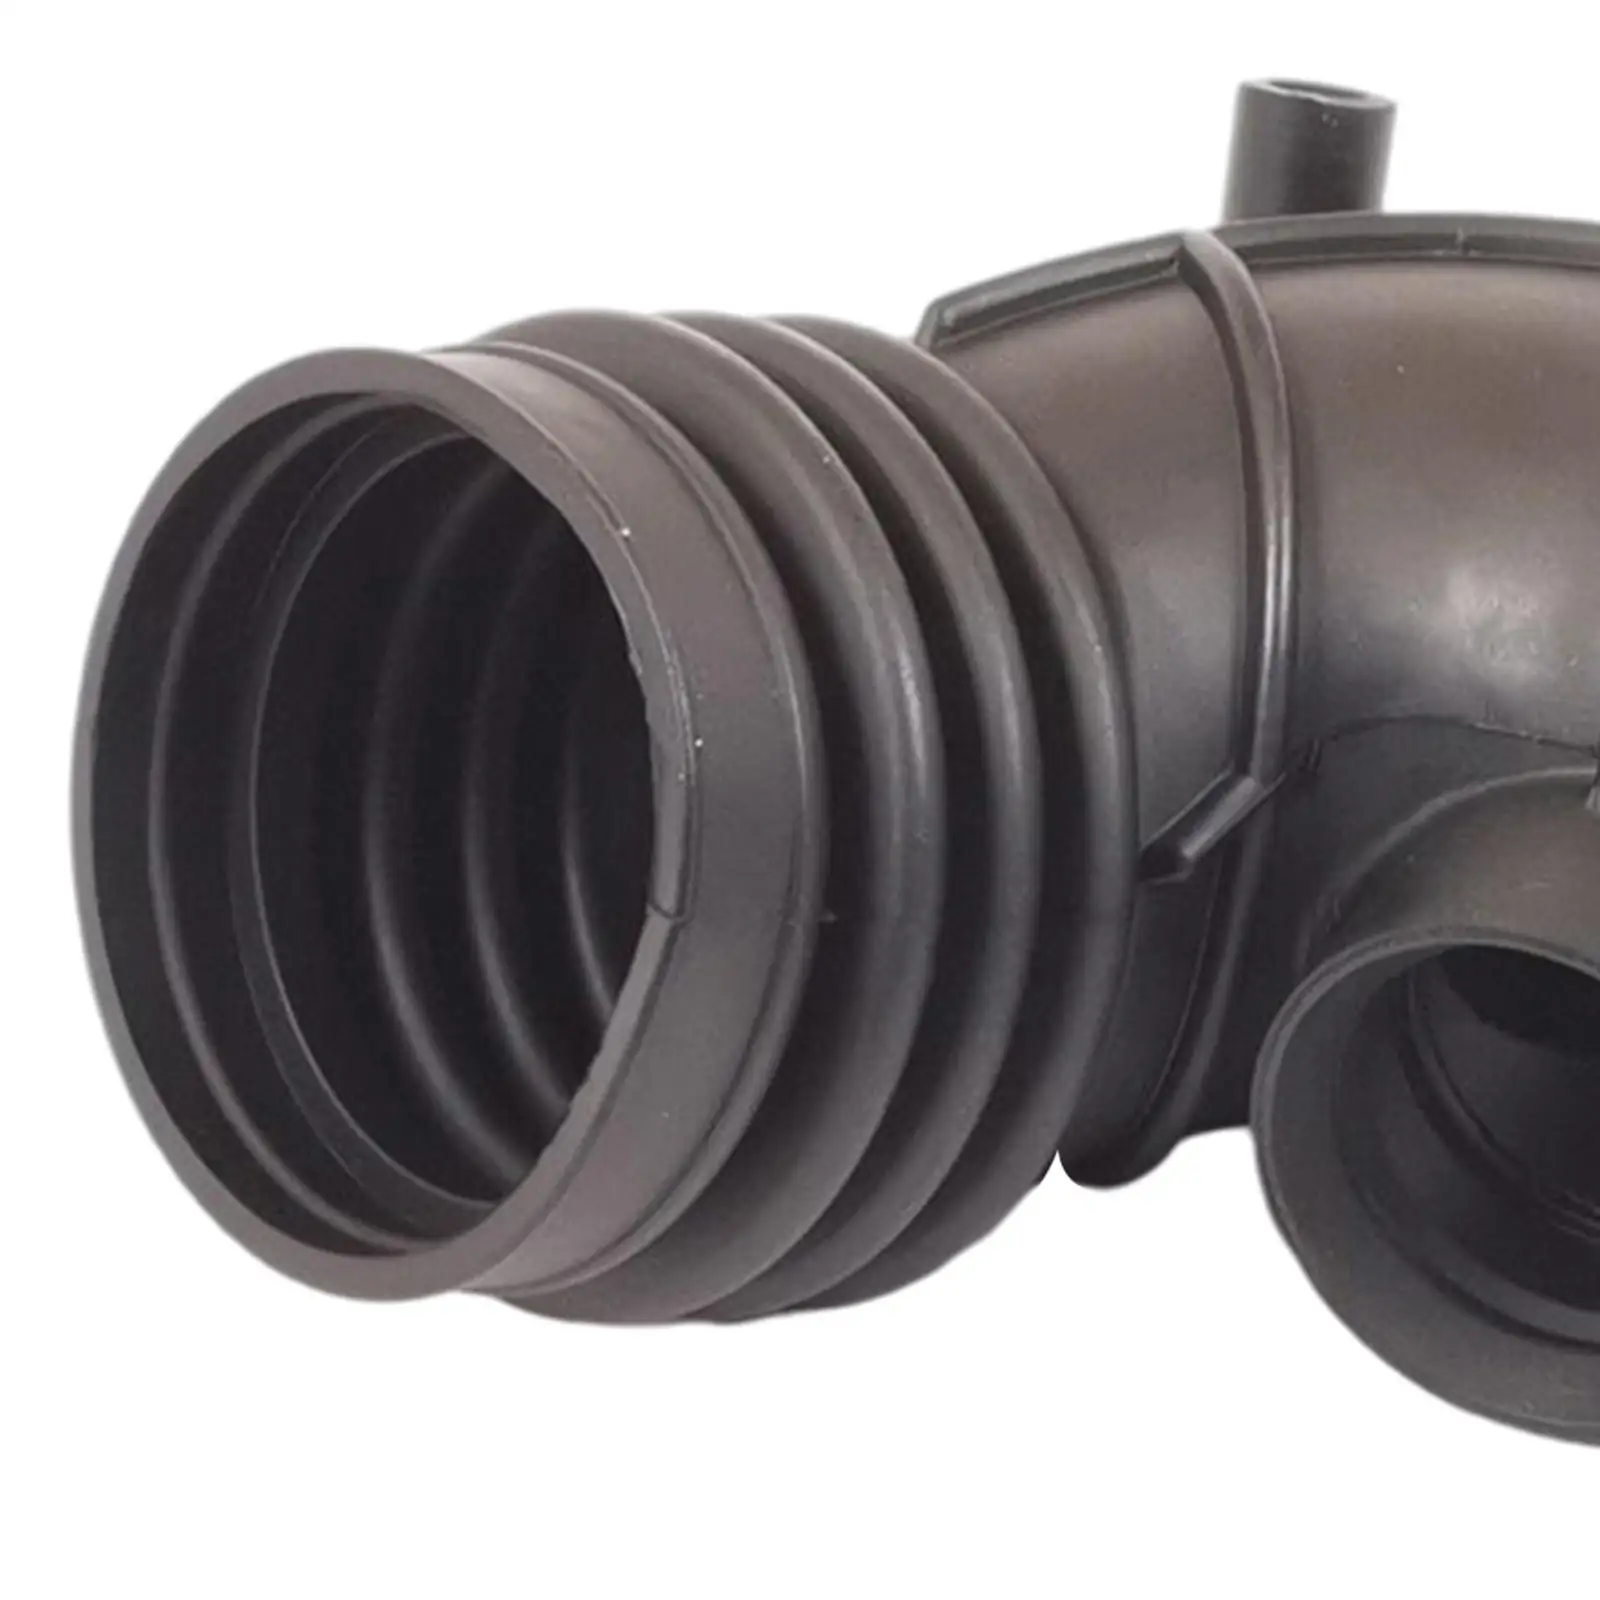 Air Flow Meter Mass Sensor Intake Boot Elbow Hose for BMW E38 E39 Parts ACC 13541435625 Replacement